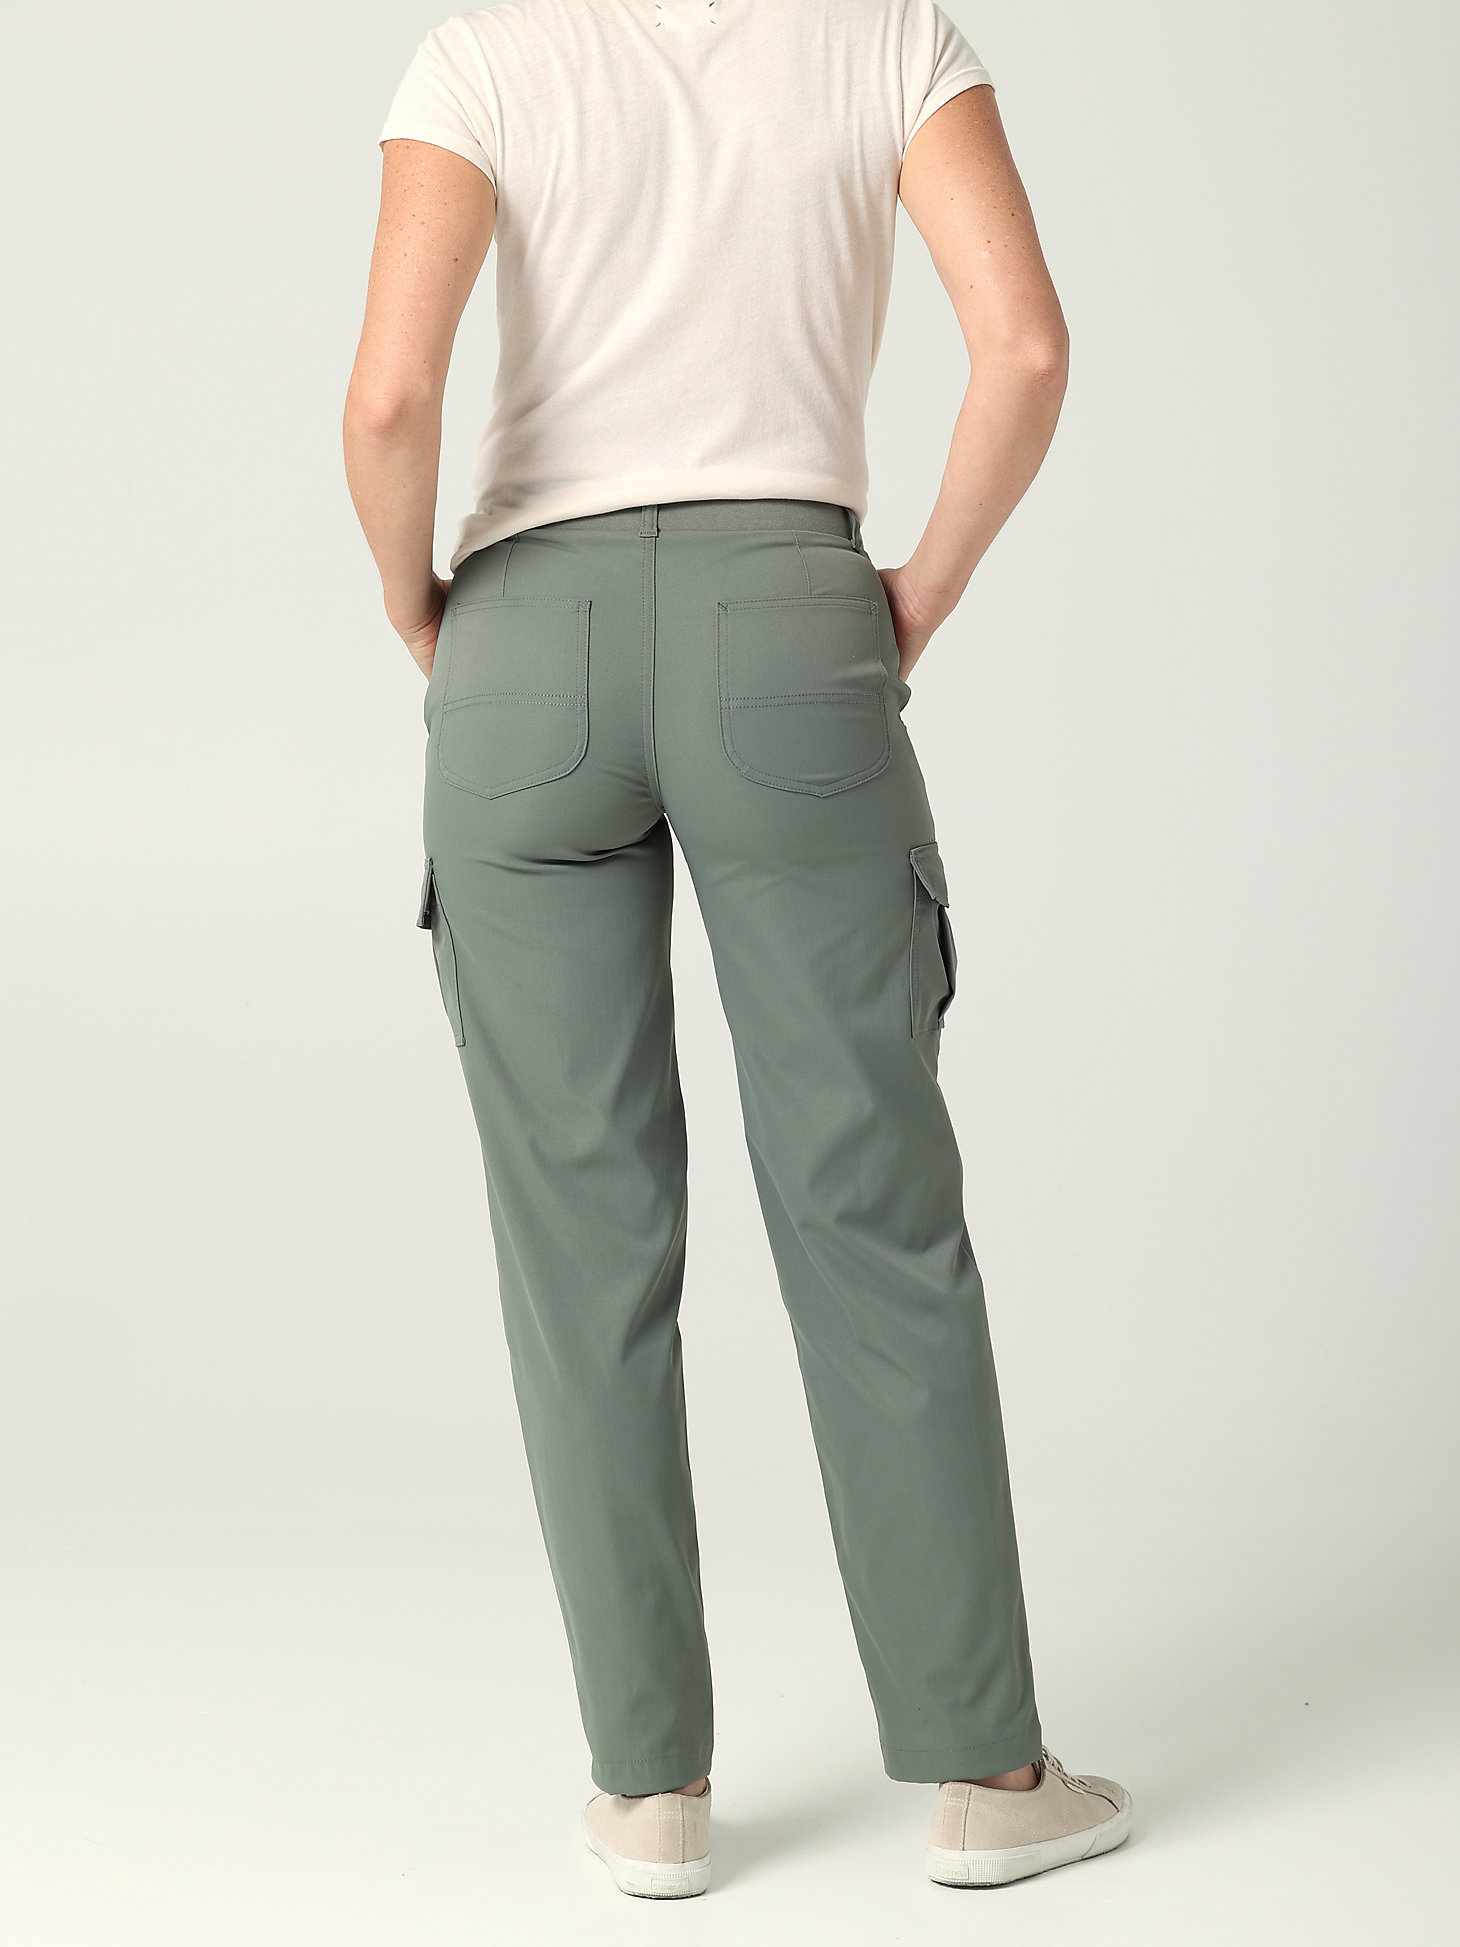 Women's Flex-to-Go Seamed Cargo Straight Leg Pant in Fort Green alternative view 1